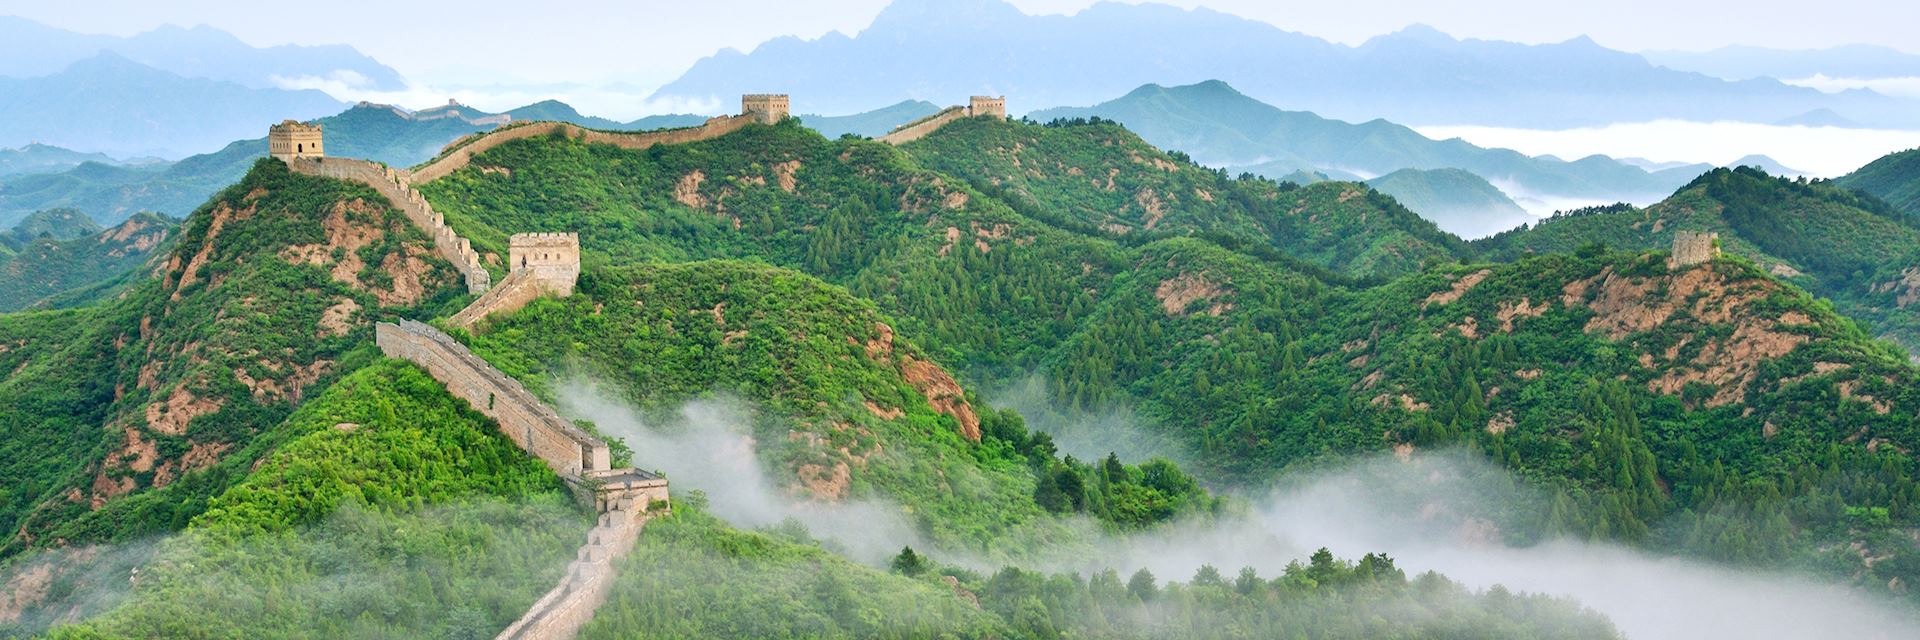 How to Plan a Trip to Great Wall Of China 